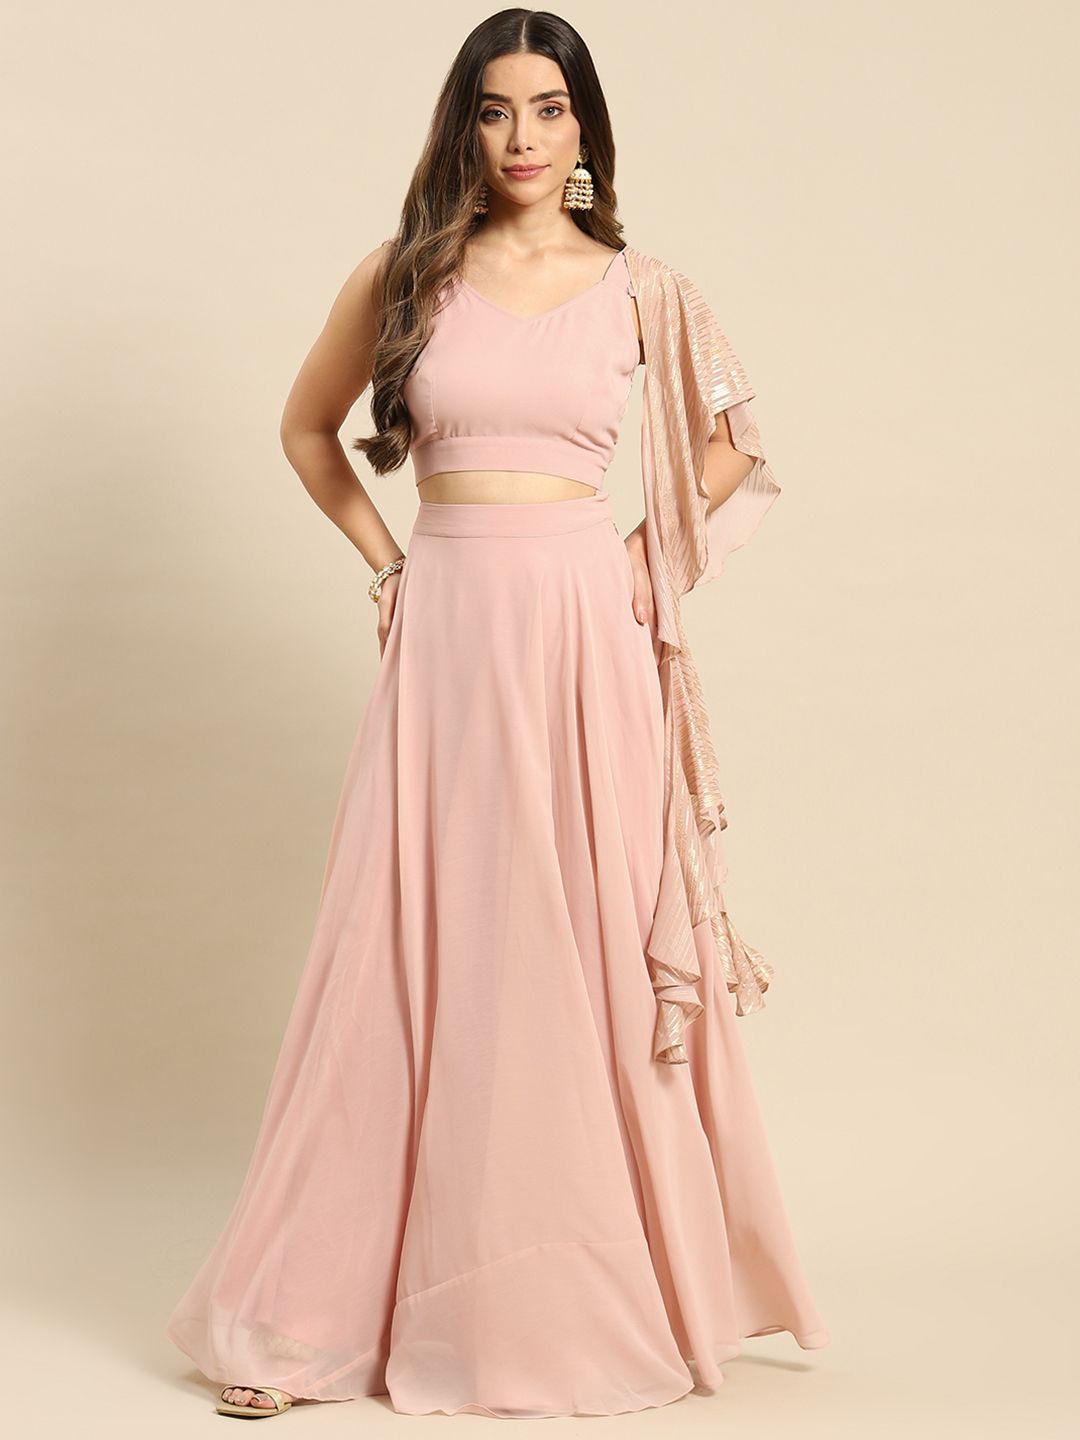 MABISH by Sonal Jain Pink Ready to Wear Lehenga & Blouse With Dupatta Price in India